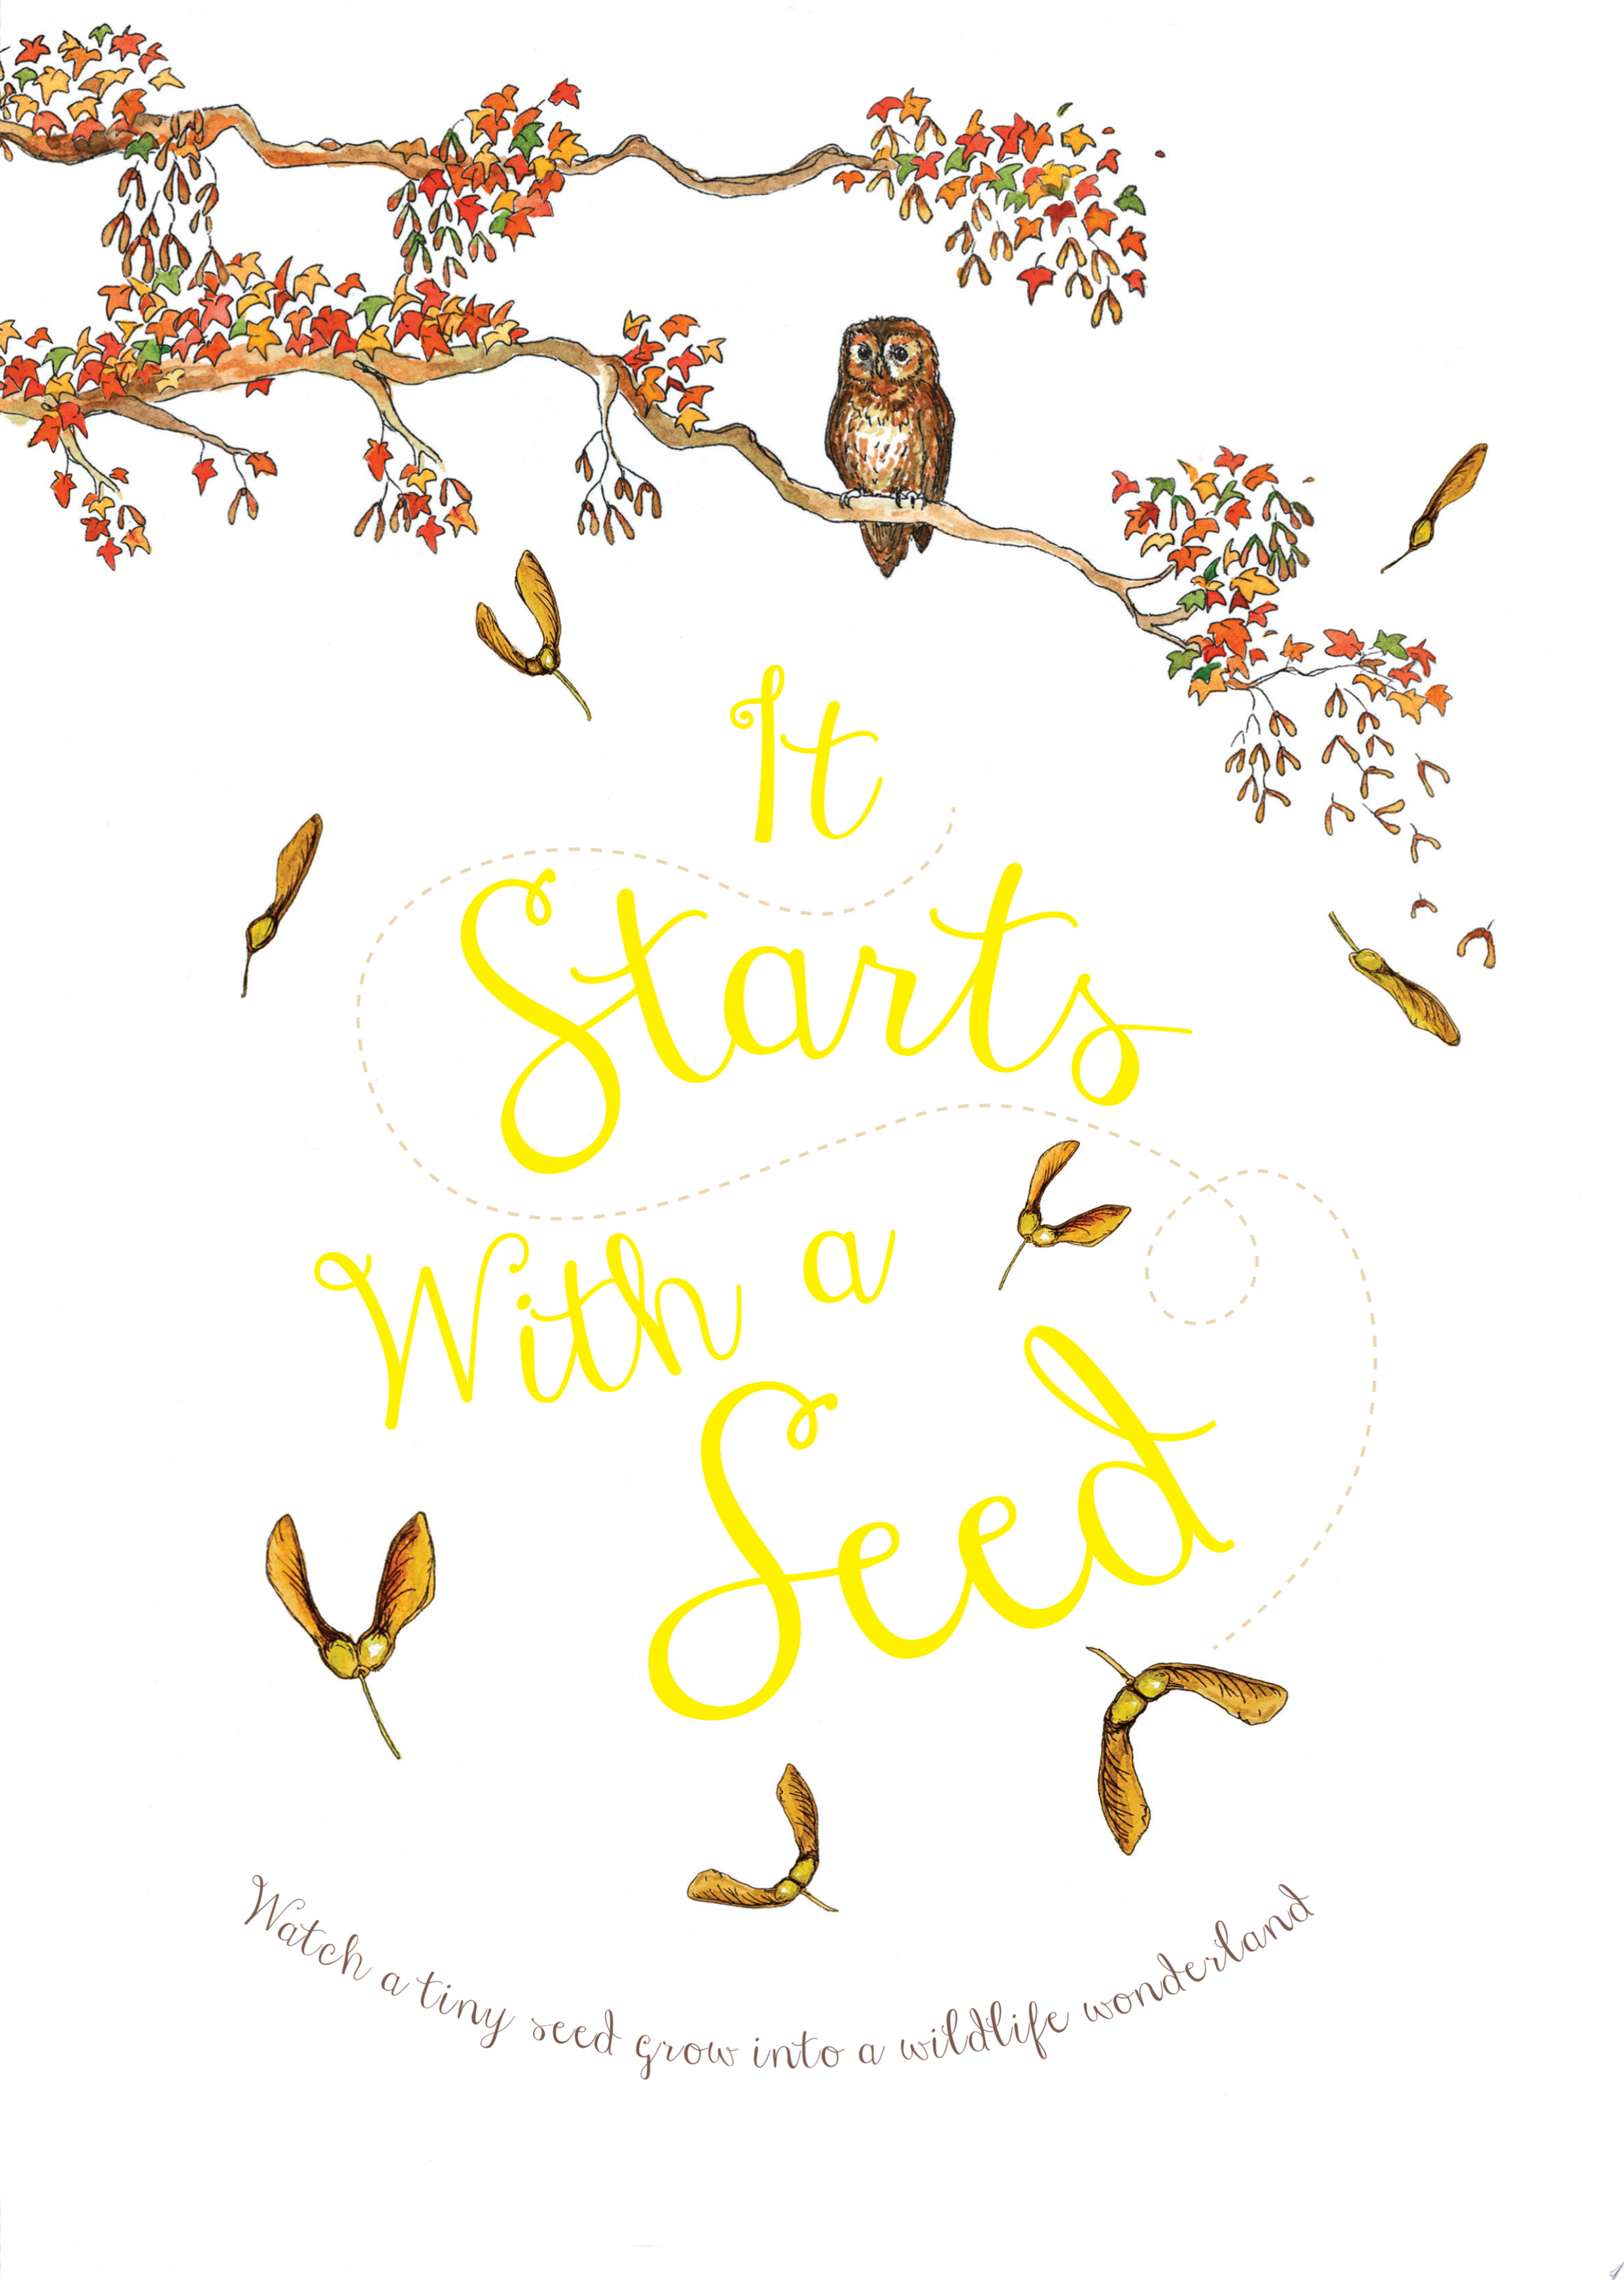 Image for "It Starts With A Seed"